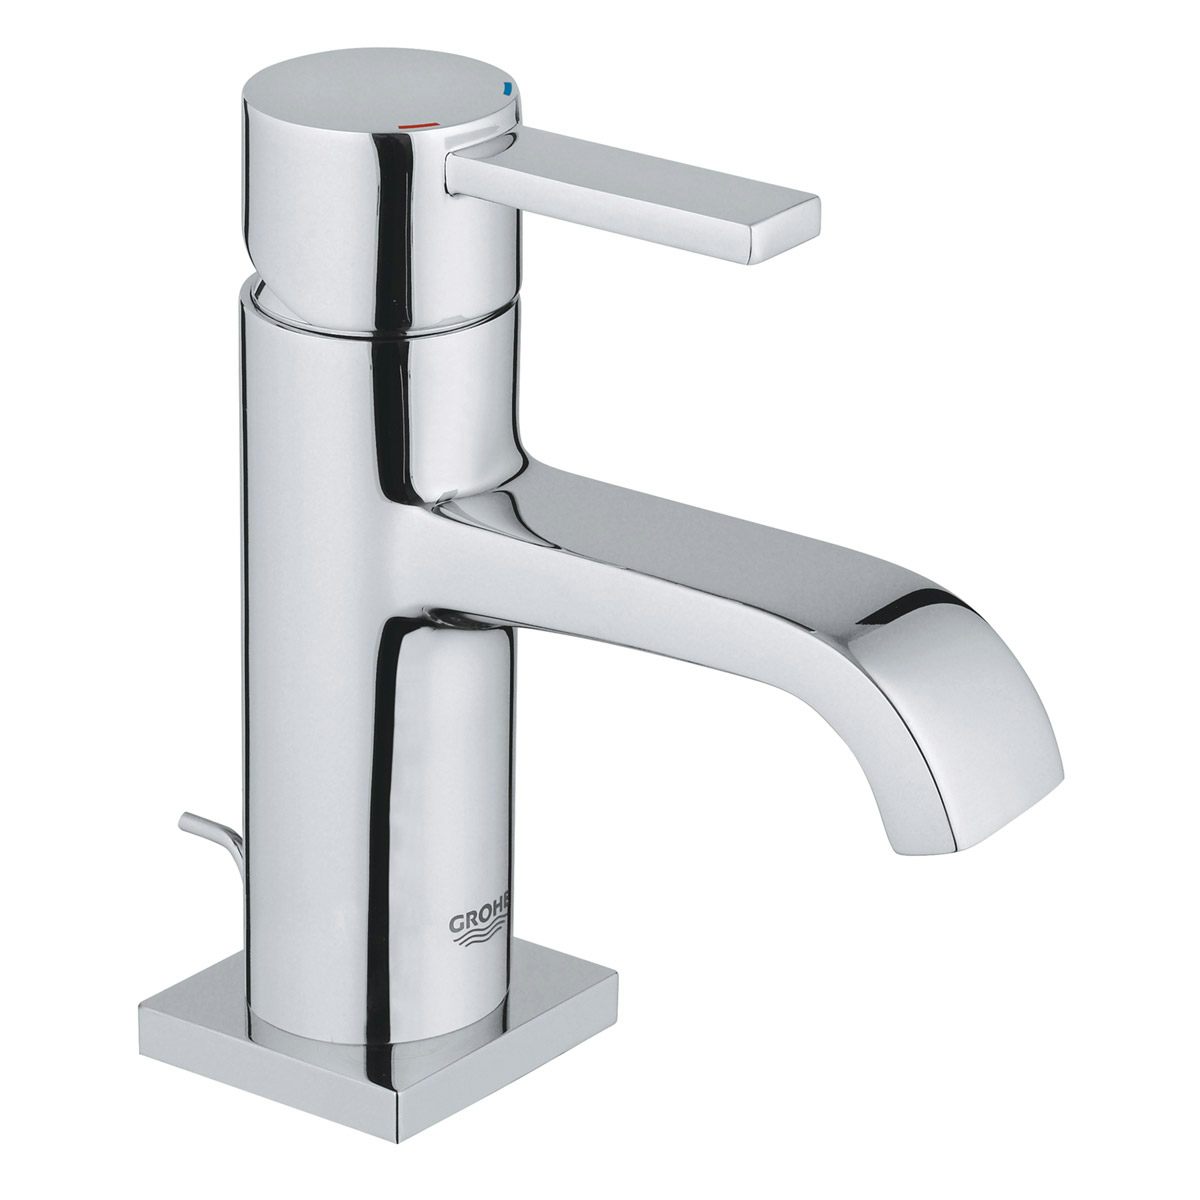 Grohe Allure M-size basin mixer tap with pop up waste